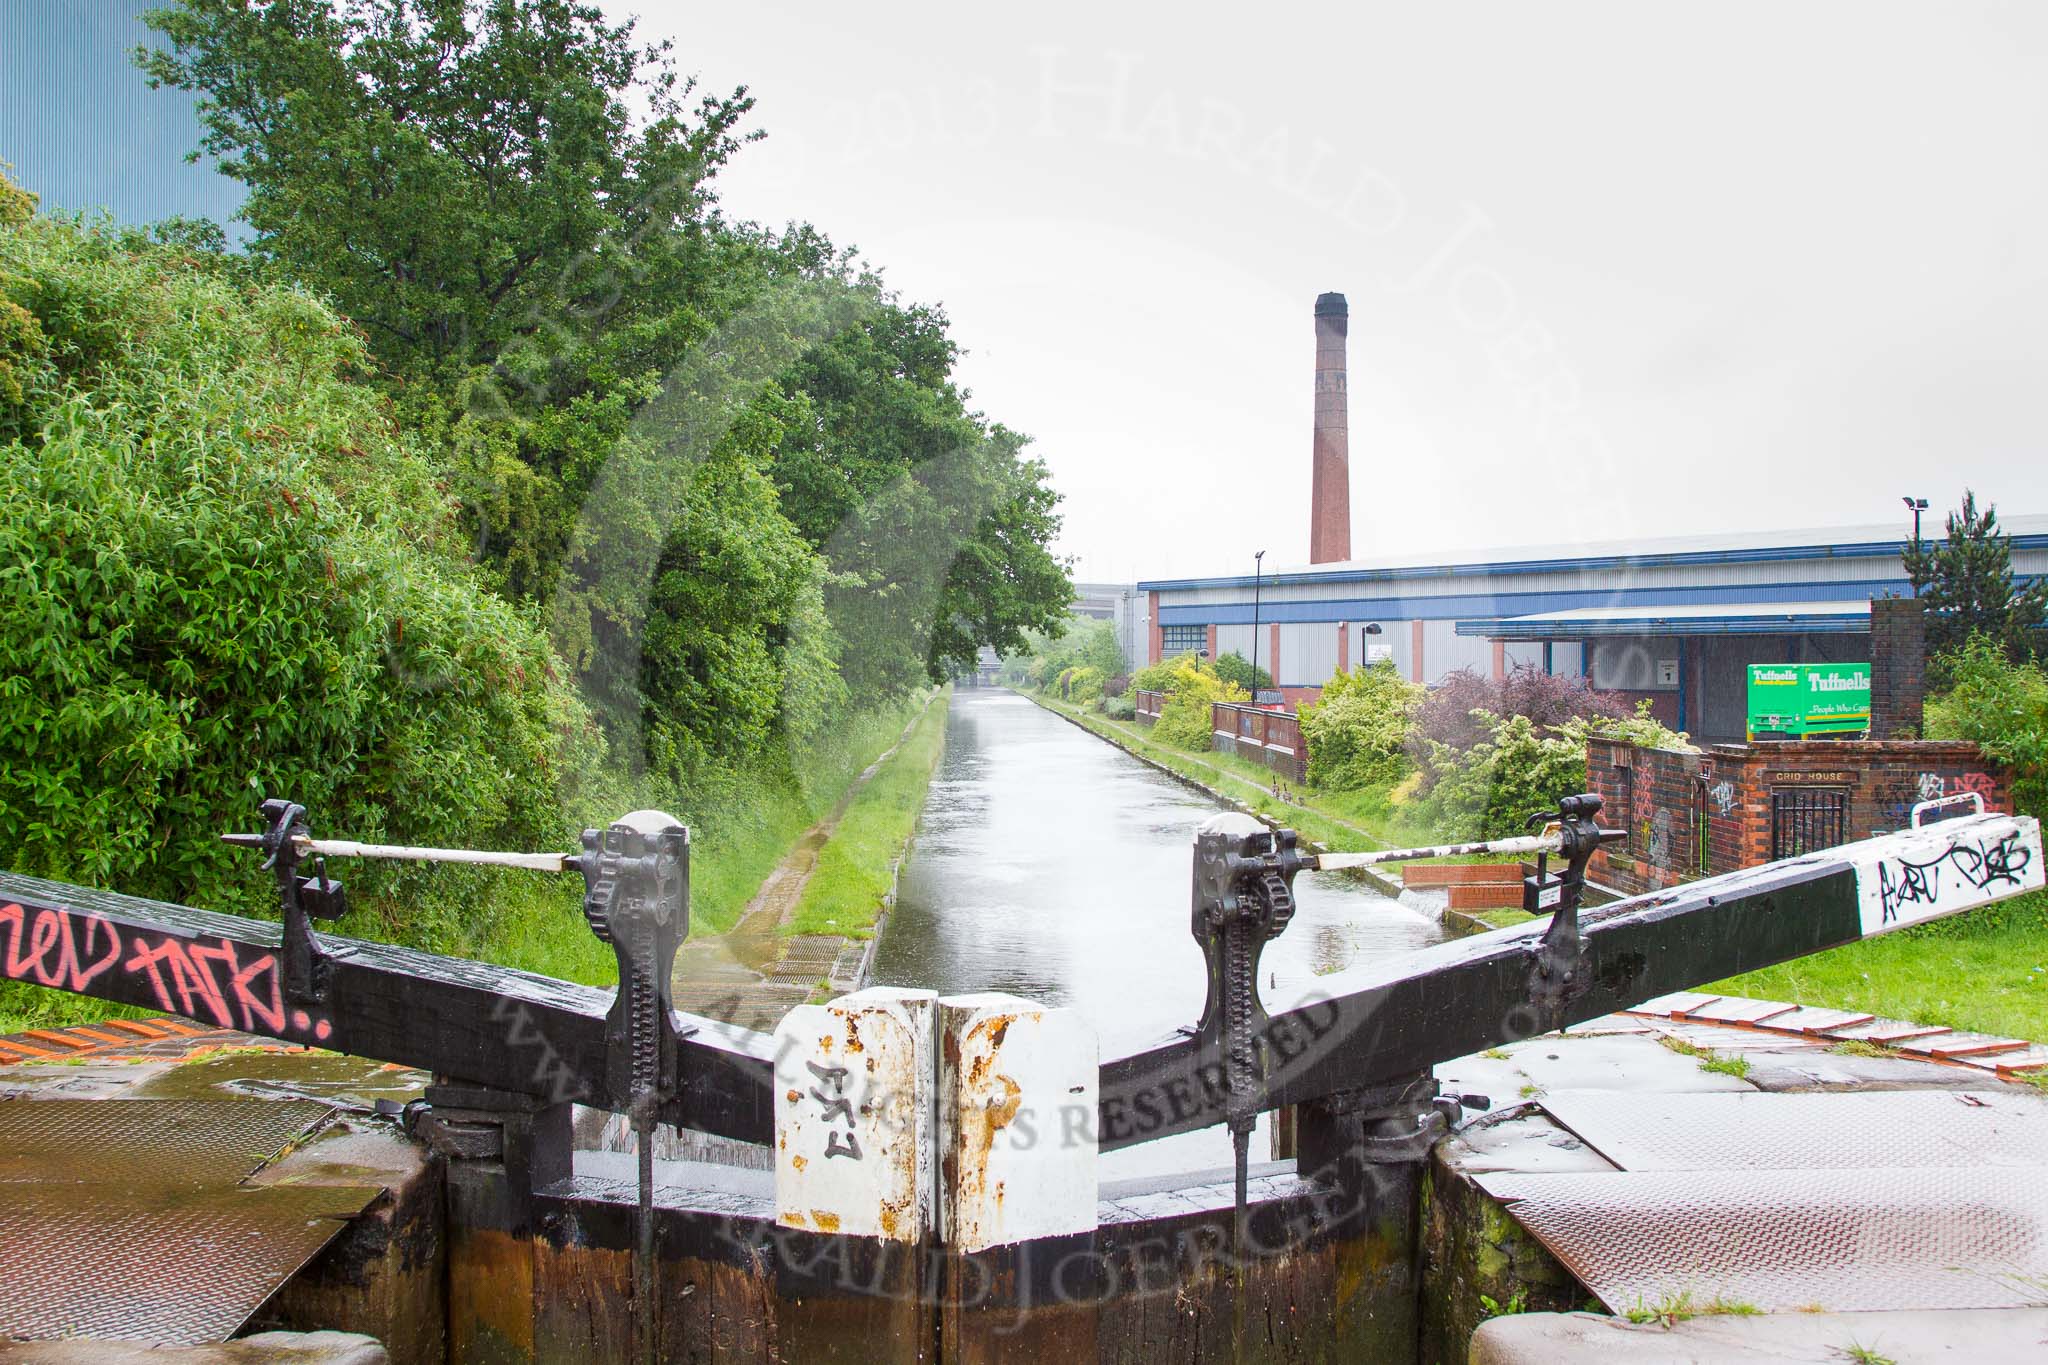 BCN Marathon Challenge 2014: In Perry Bar Bottom Lock on the Tame Valley Canal, looking toward Salford Junction.
Birmingham Canal Navigation,


United Kingdom,
on 24 May 2014 at 12:14, image #114